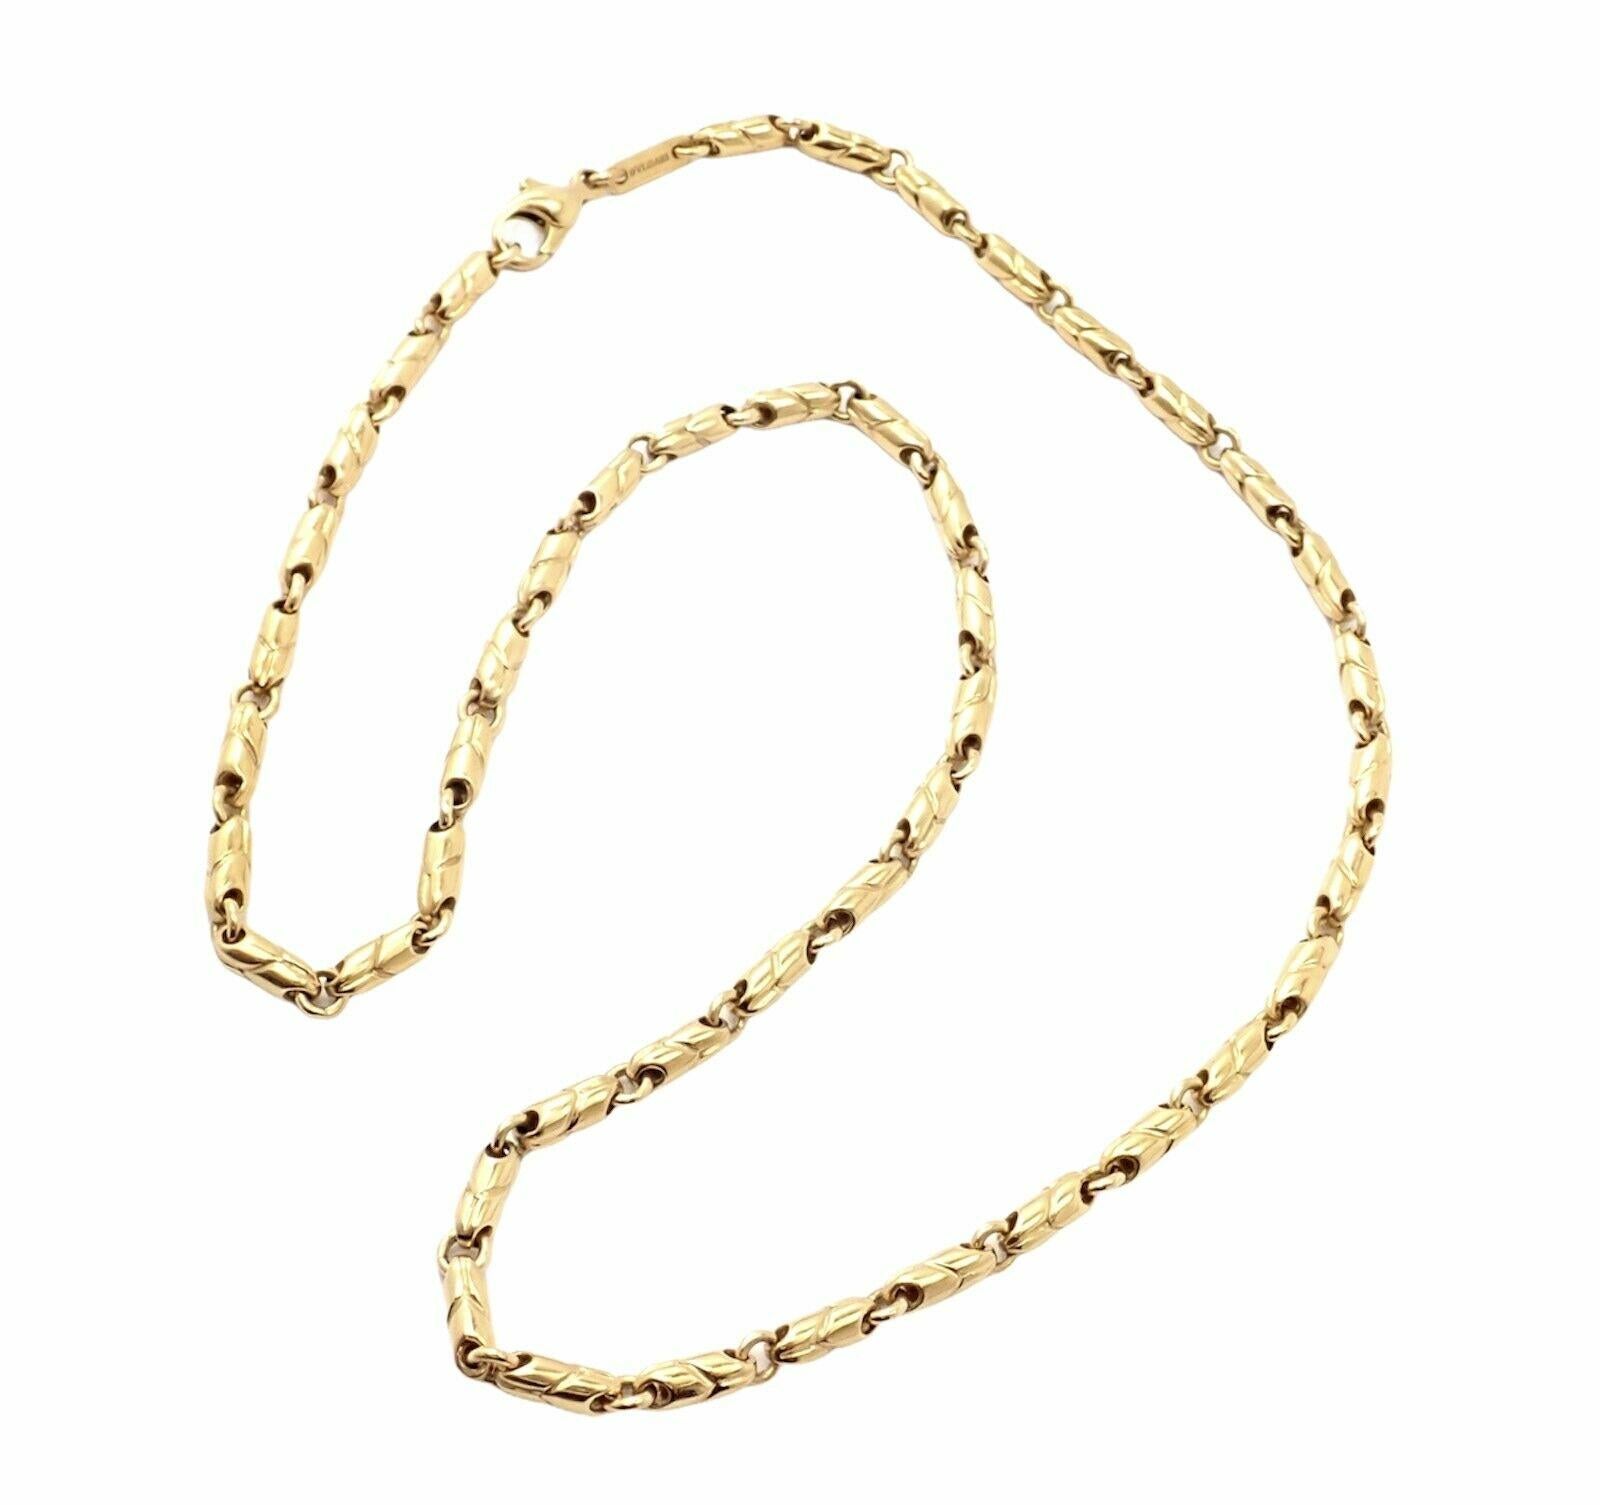 18k Yellow Gold Link Chain Necklace by Bulgari.
Details:
Length: 19